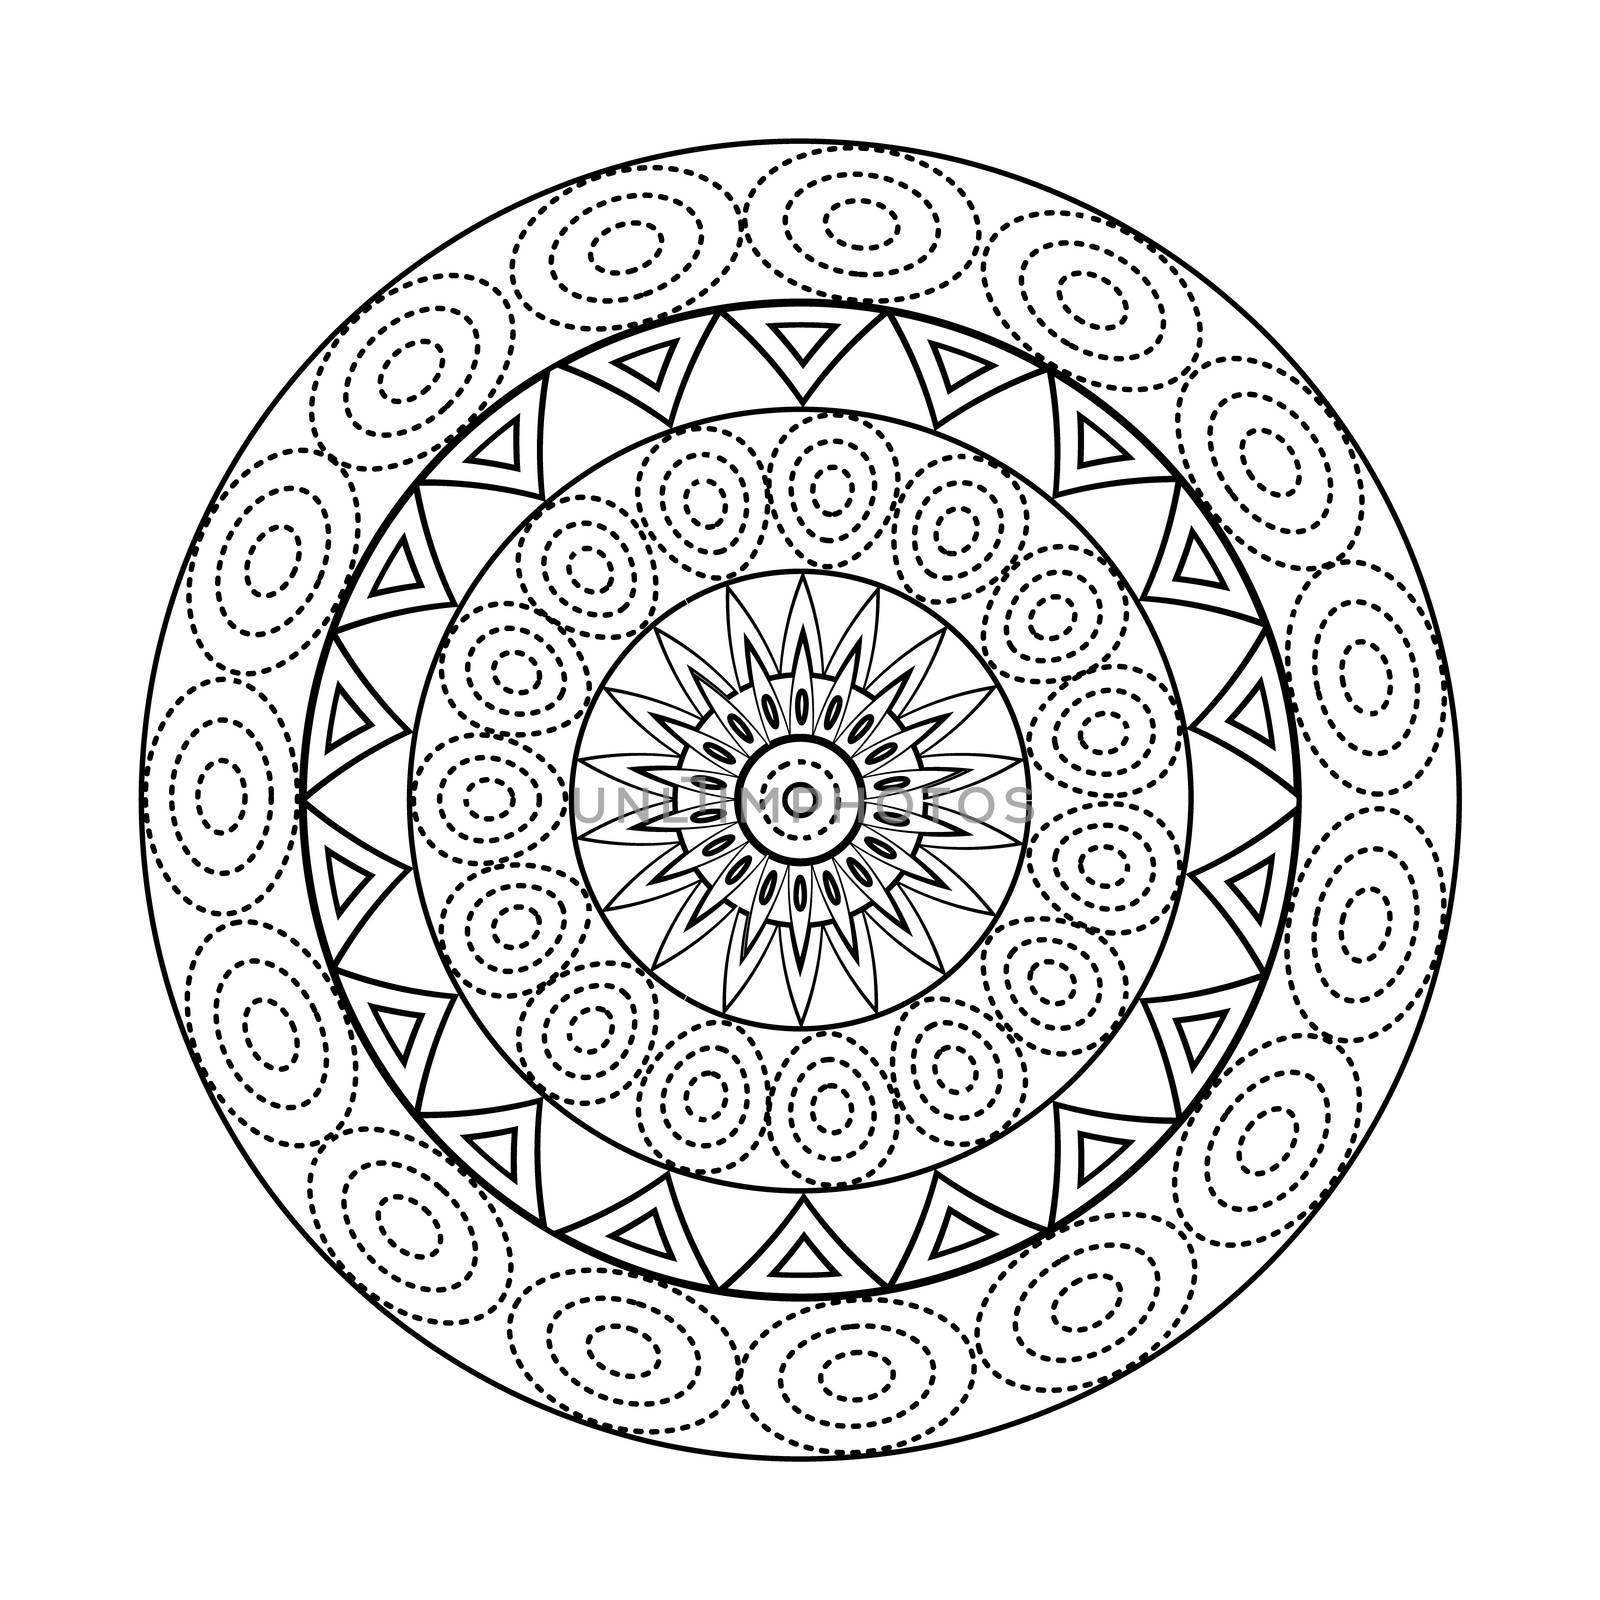 Mandalas for coloring book. Decorative black and white round outline ornament. Unusual flower shape. Oriental and anti-stress therapy patterns by Asnia